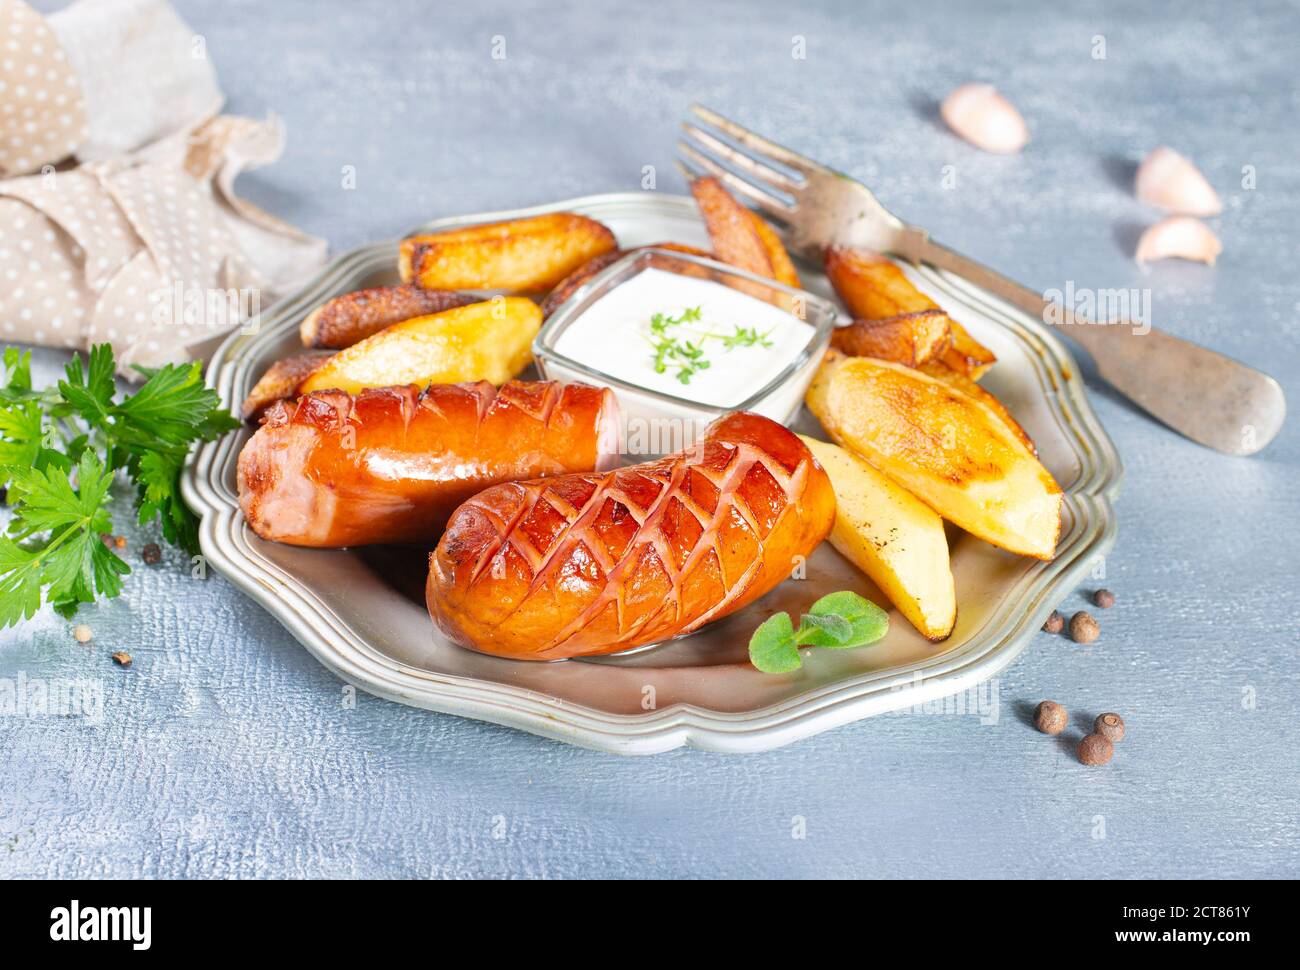 fried sausages with potato on metal plate Stock Photo